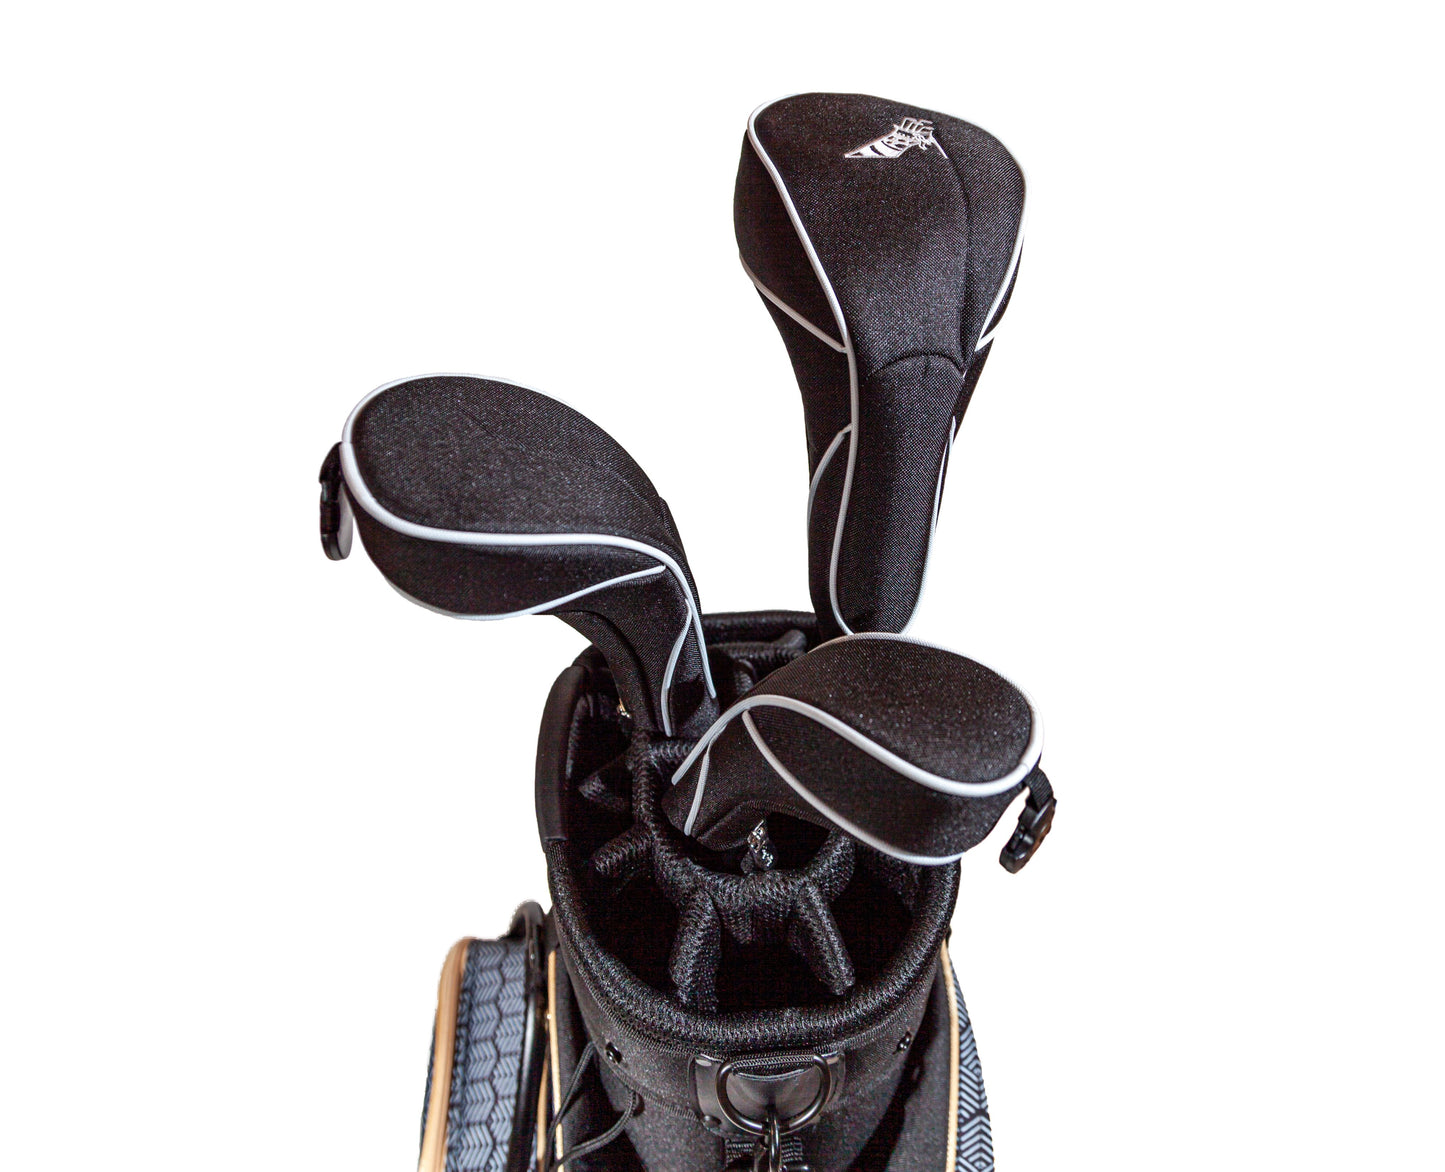 Black with White Piping Hybrid Headcover